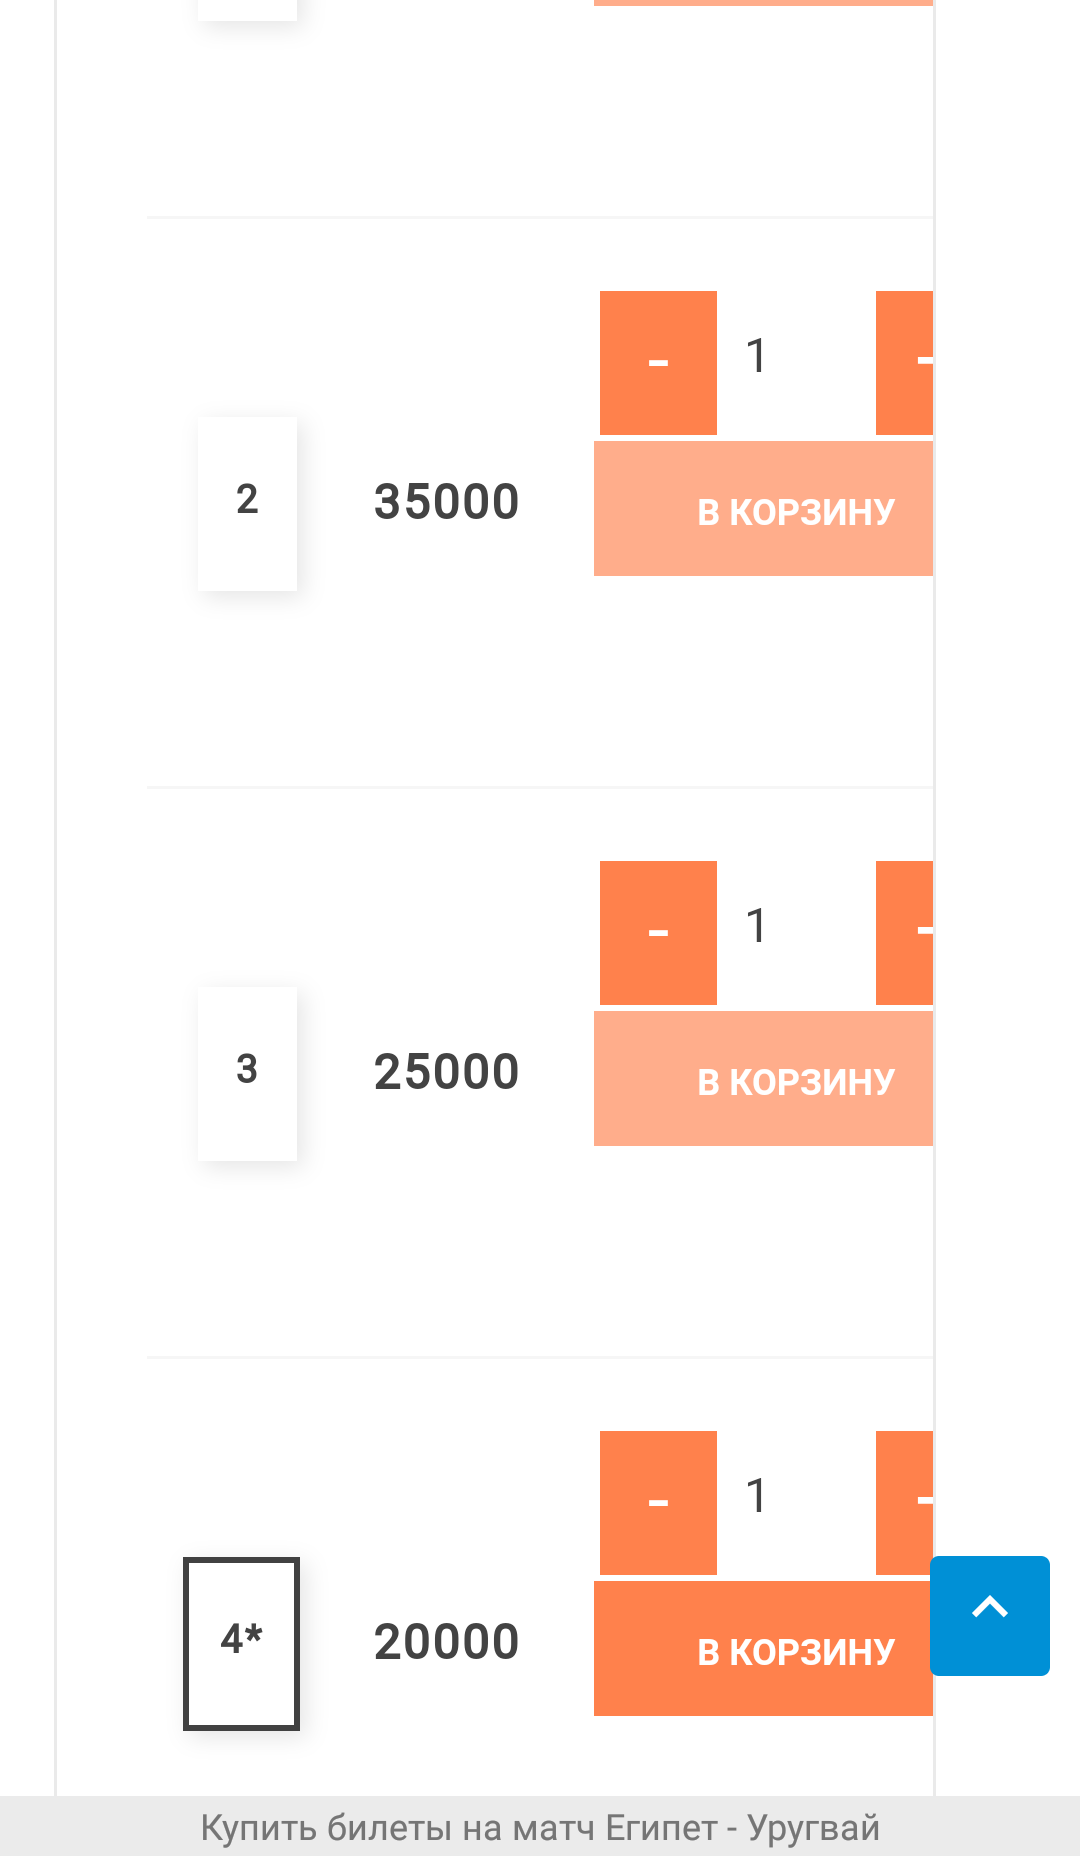 The match between Uruguay and Egypt in Yekaterinburg did not attract a full house - 2018 FIFA World Cup, Football, Yekaterinburg, Egypt, Uruguay, Tickets, Longpost